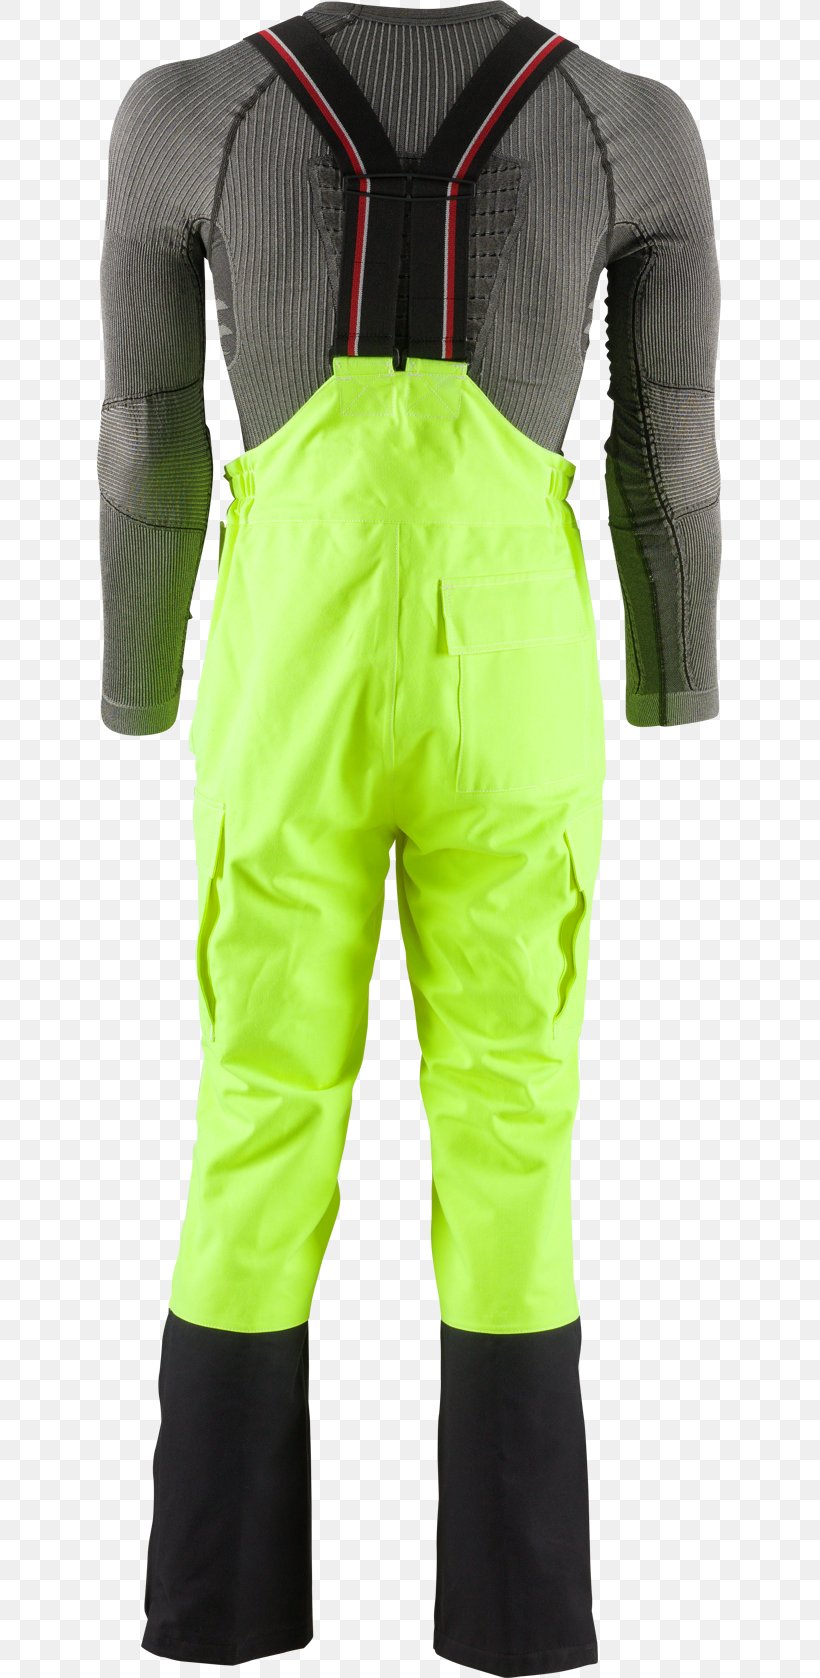 Dry Suit Green Motorcycle Clothing, PNG, 625x1678px, Dry Suit, Clothing, Green, Motorcycle, Motorcycle Protective Clothing Download Free